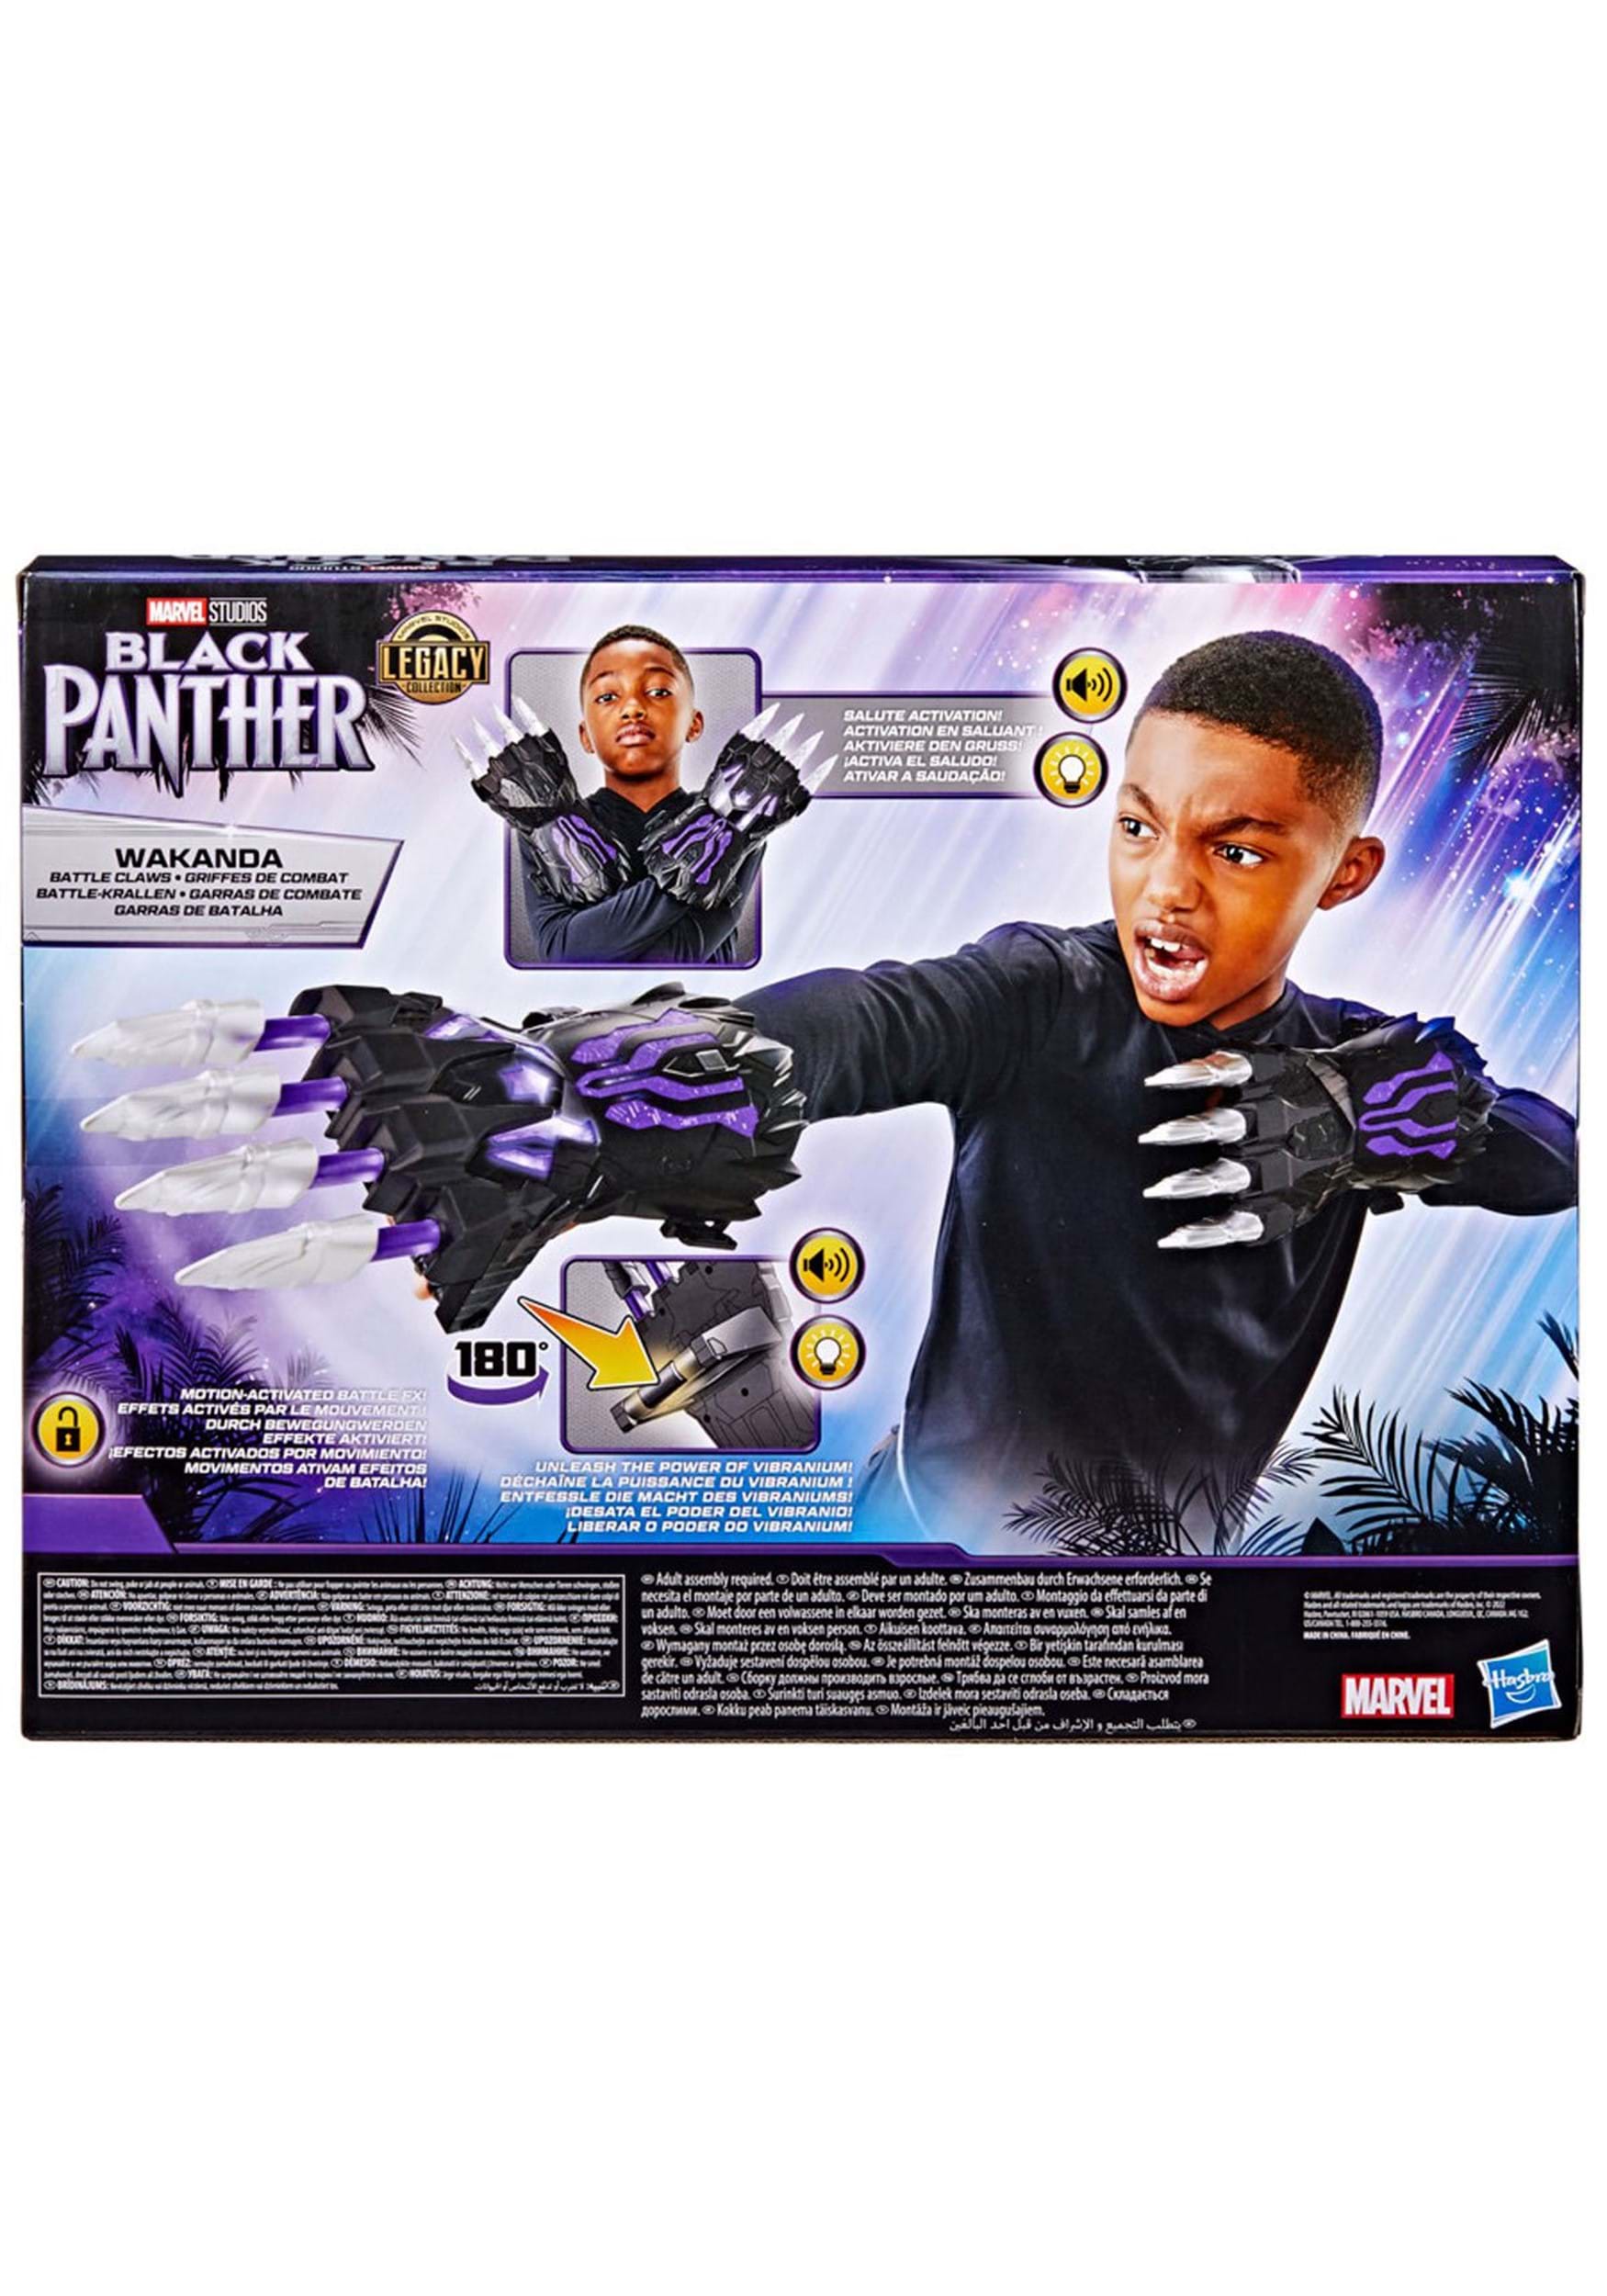 Black Panther Wakanda Battle Claws Accessories